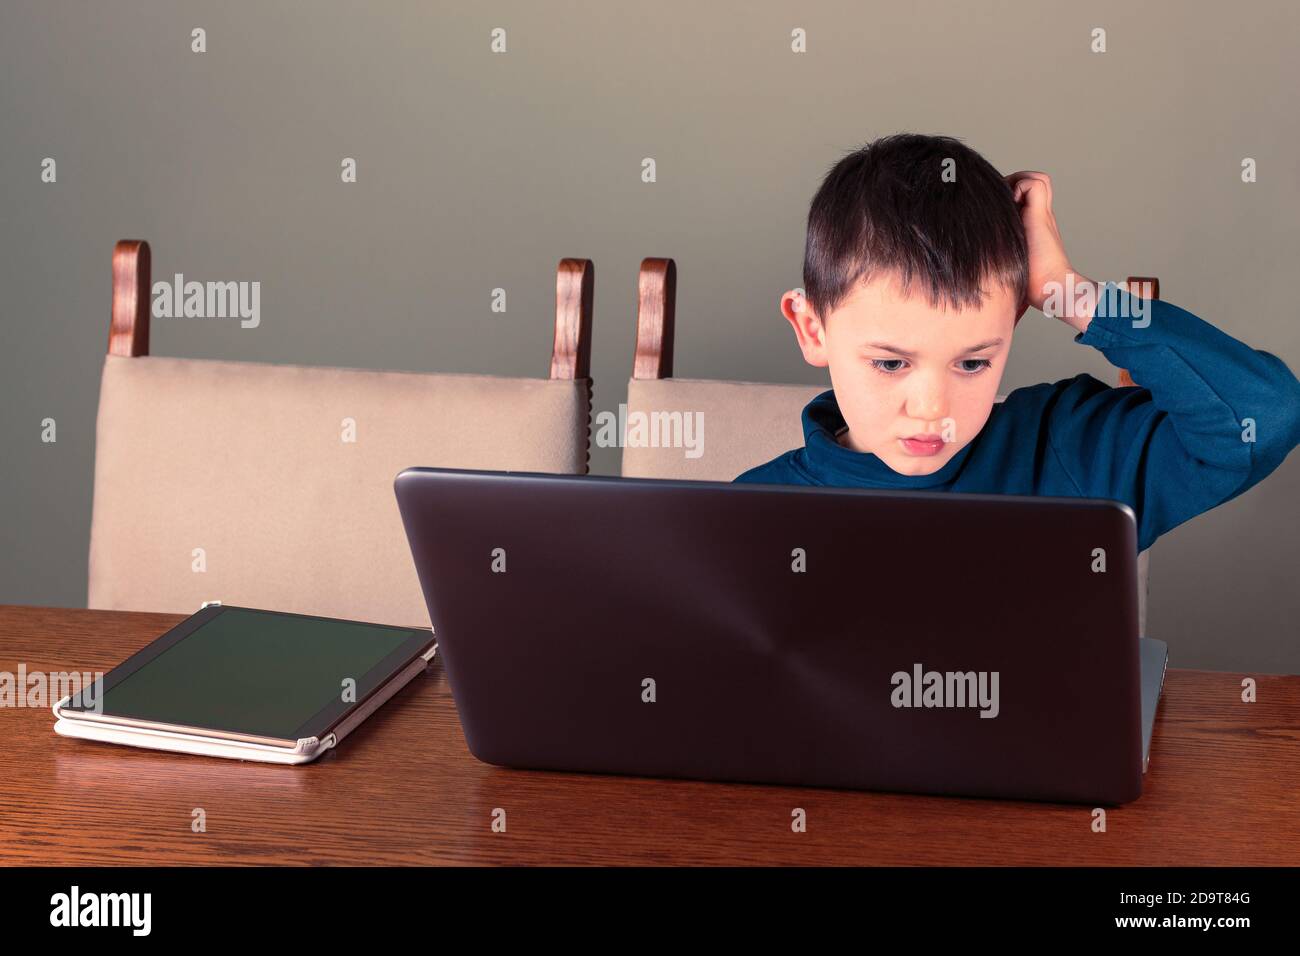 Eight year old boy using laptop and tablet computers scratches his head. Homeschooling or digital technology theme Stock Photo